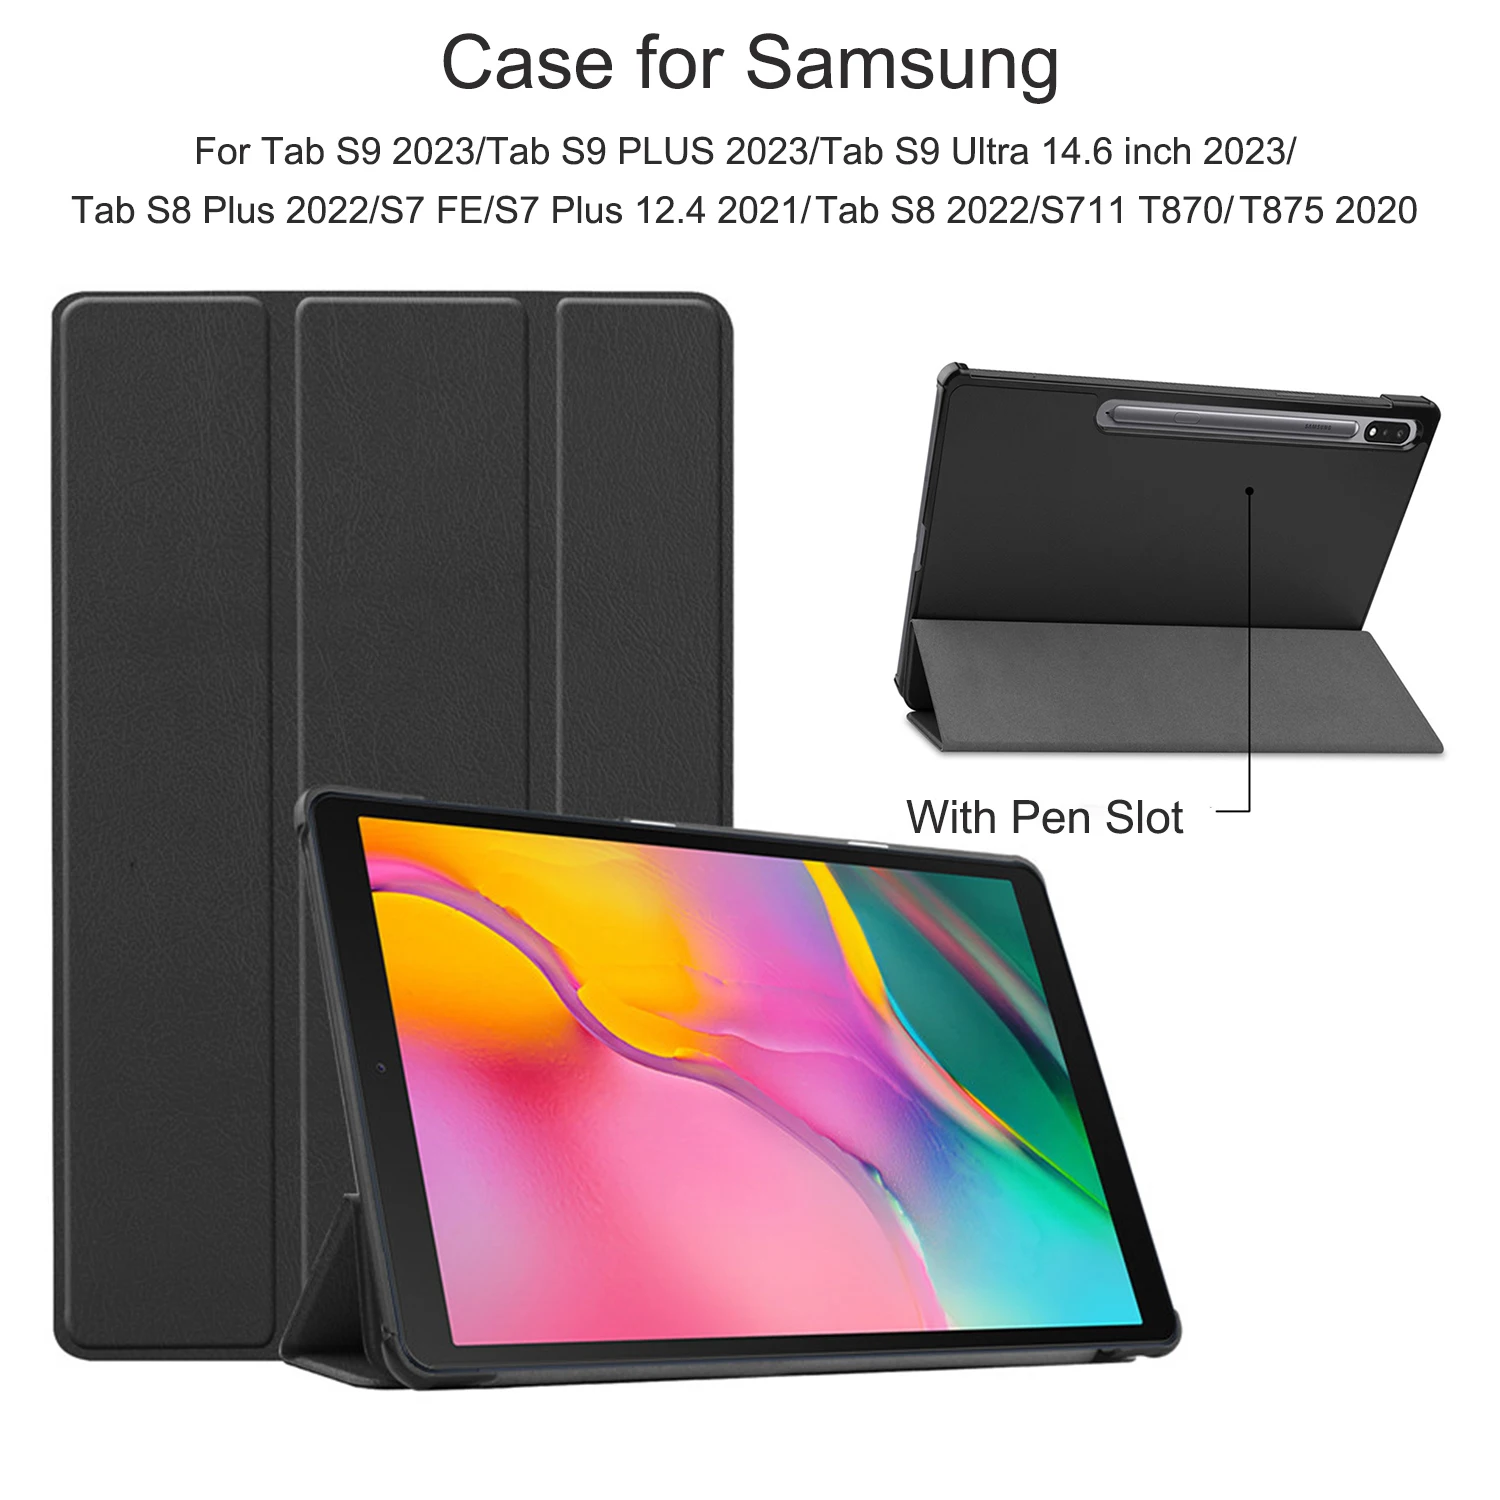 

Case For Samsung Tab S9 Plus 12.4" Trifold Magnetic Leather Stand Hard Smart Cover for Coque Galaxy Tab S9 11 2023 Case Funda